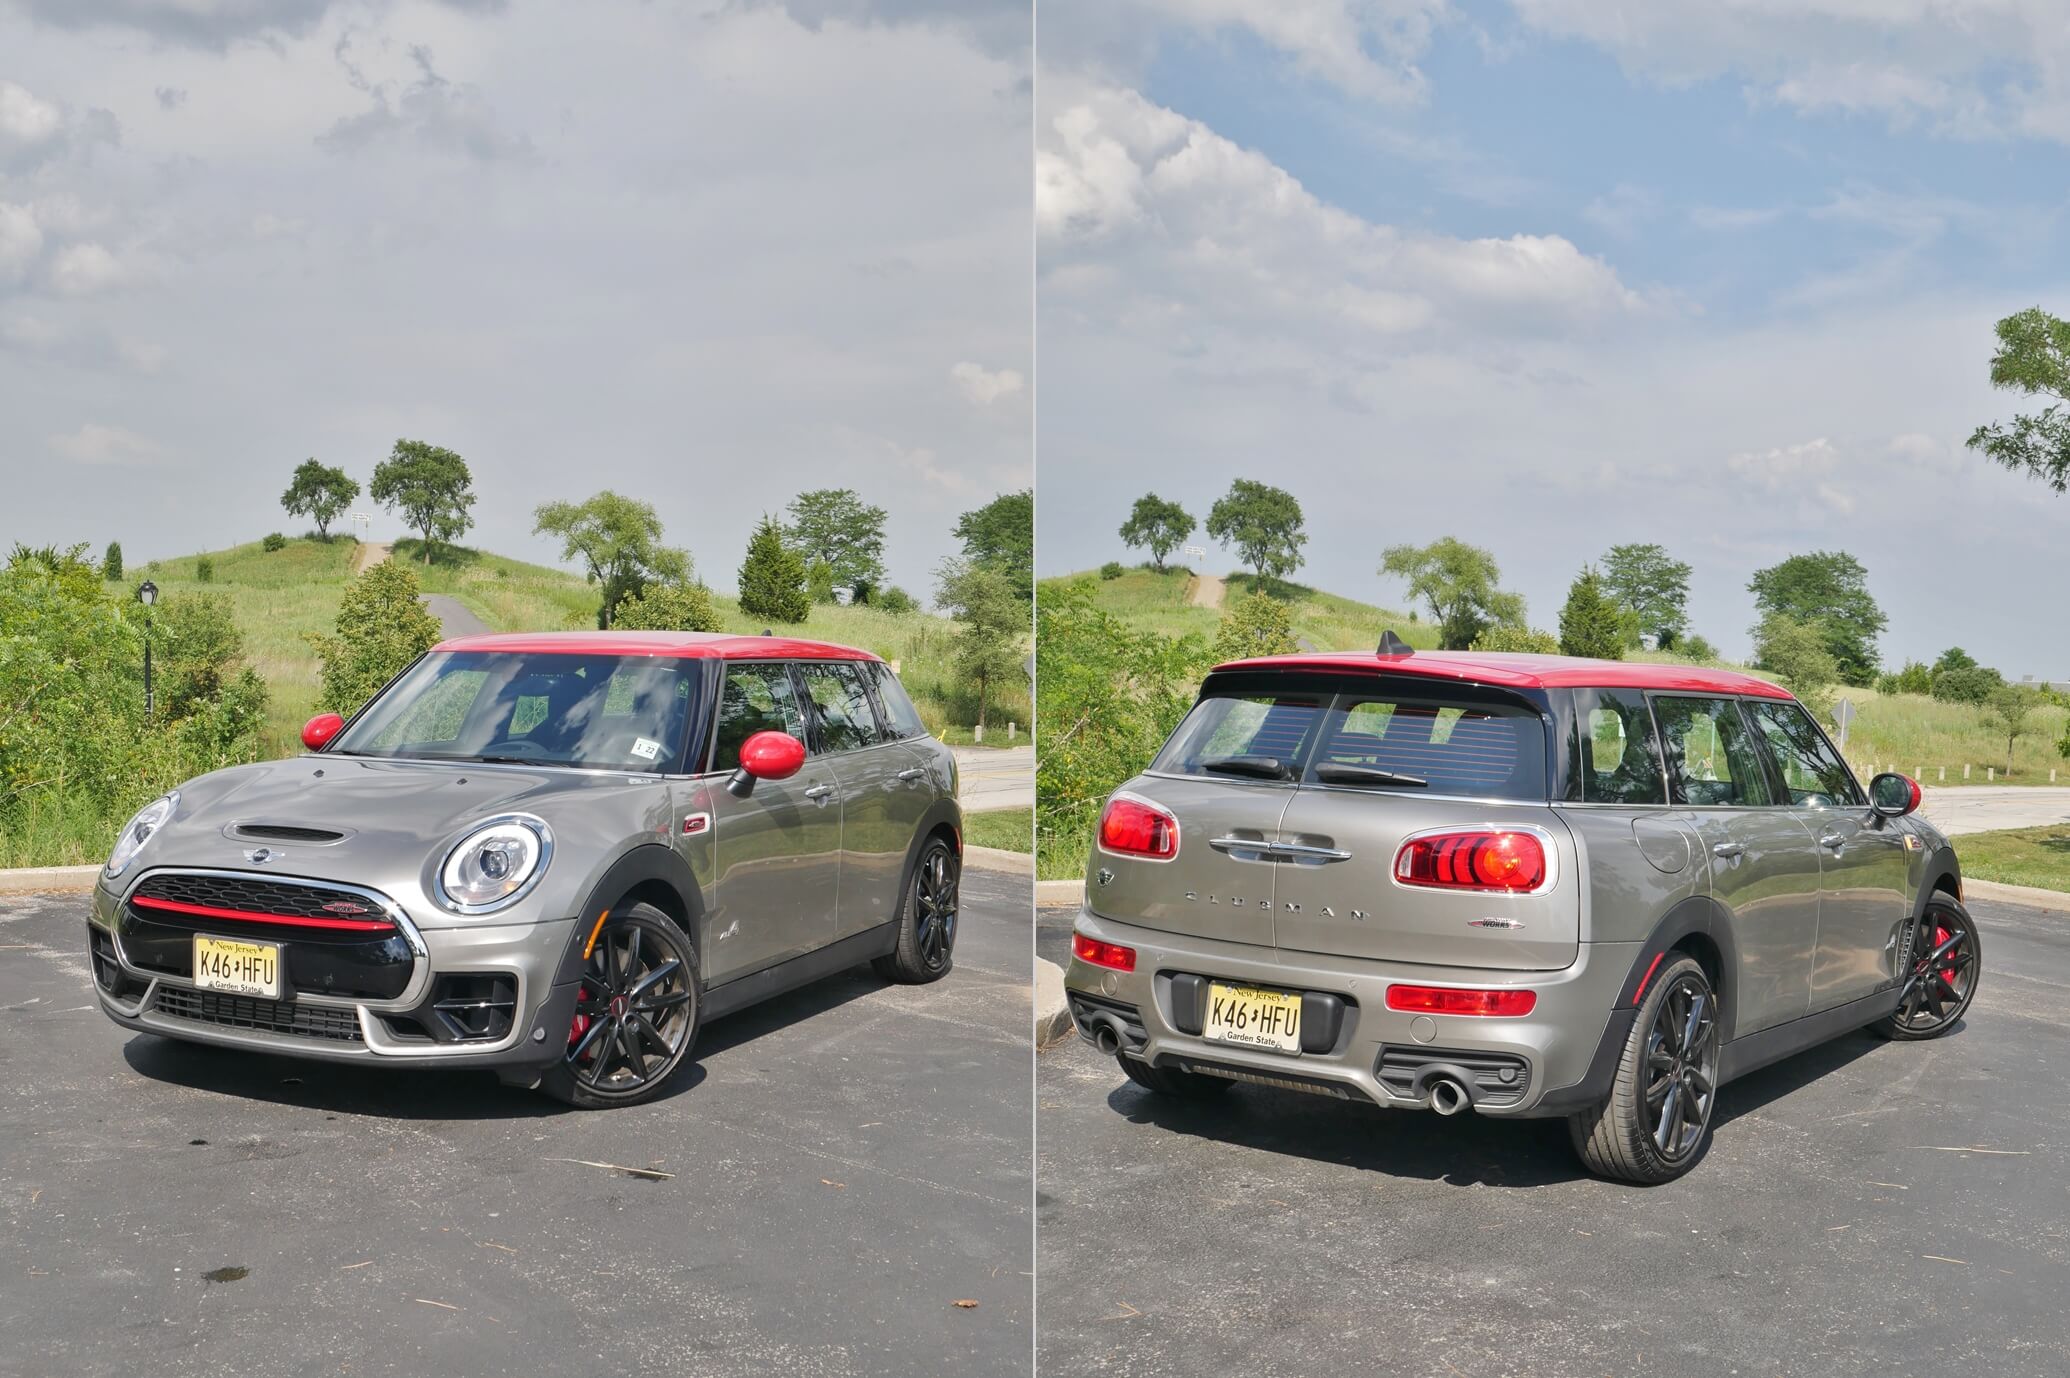 2017 MINI John Cooper Works Clubman ALL4: This decidedly wicked compact shooting brake sport wagon is priced starting at $36k. MSRP of this 2017 Melting Silver Metallic + Chili Red contrast = $40,250